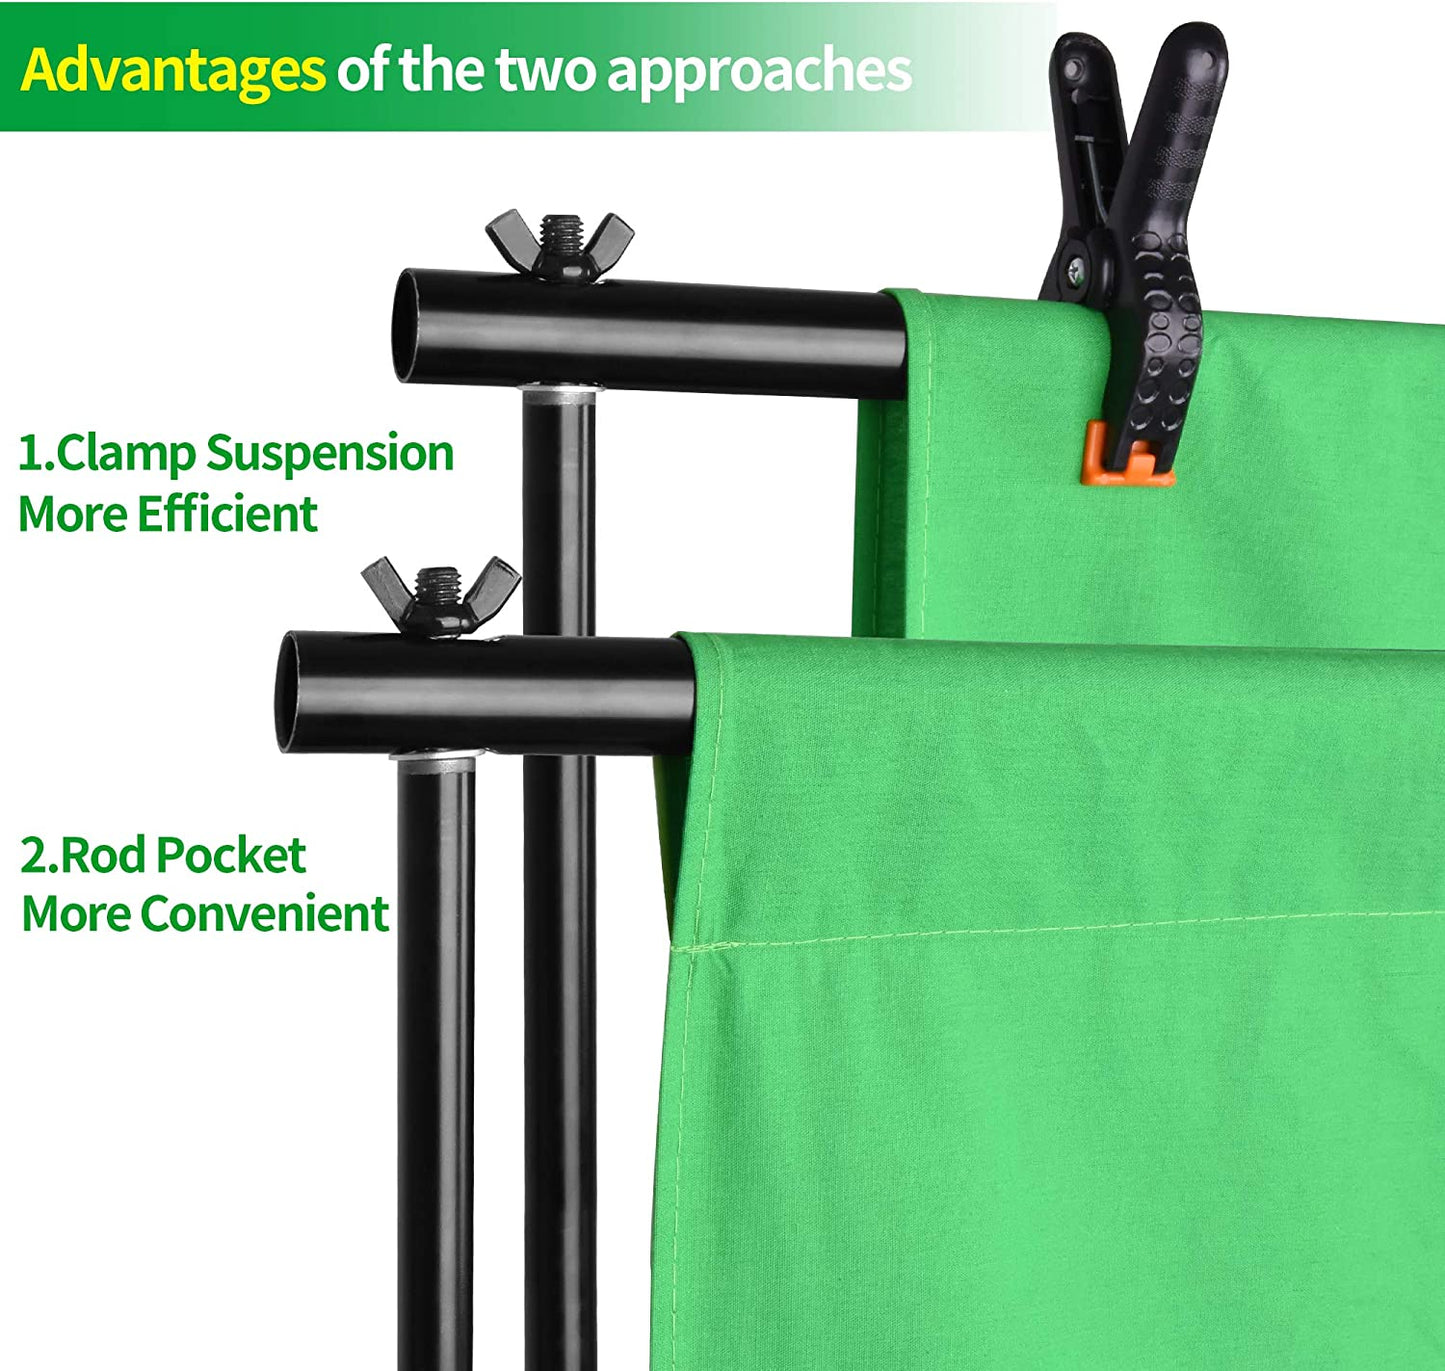 Photo Video Studio 8.5 X 10Ft Green Screen Backdrop Stand Kit, Photography Background Support System with 10 X12Ft 100% Cotton Muslin Chromakey Backdrop